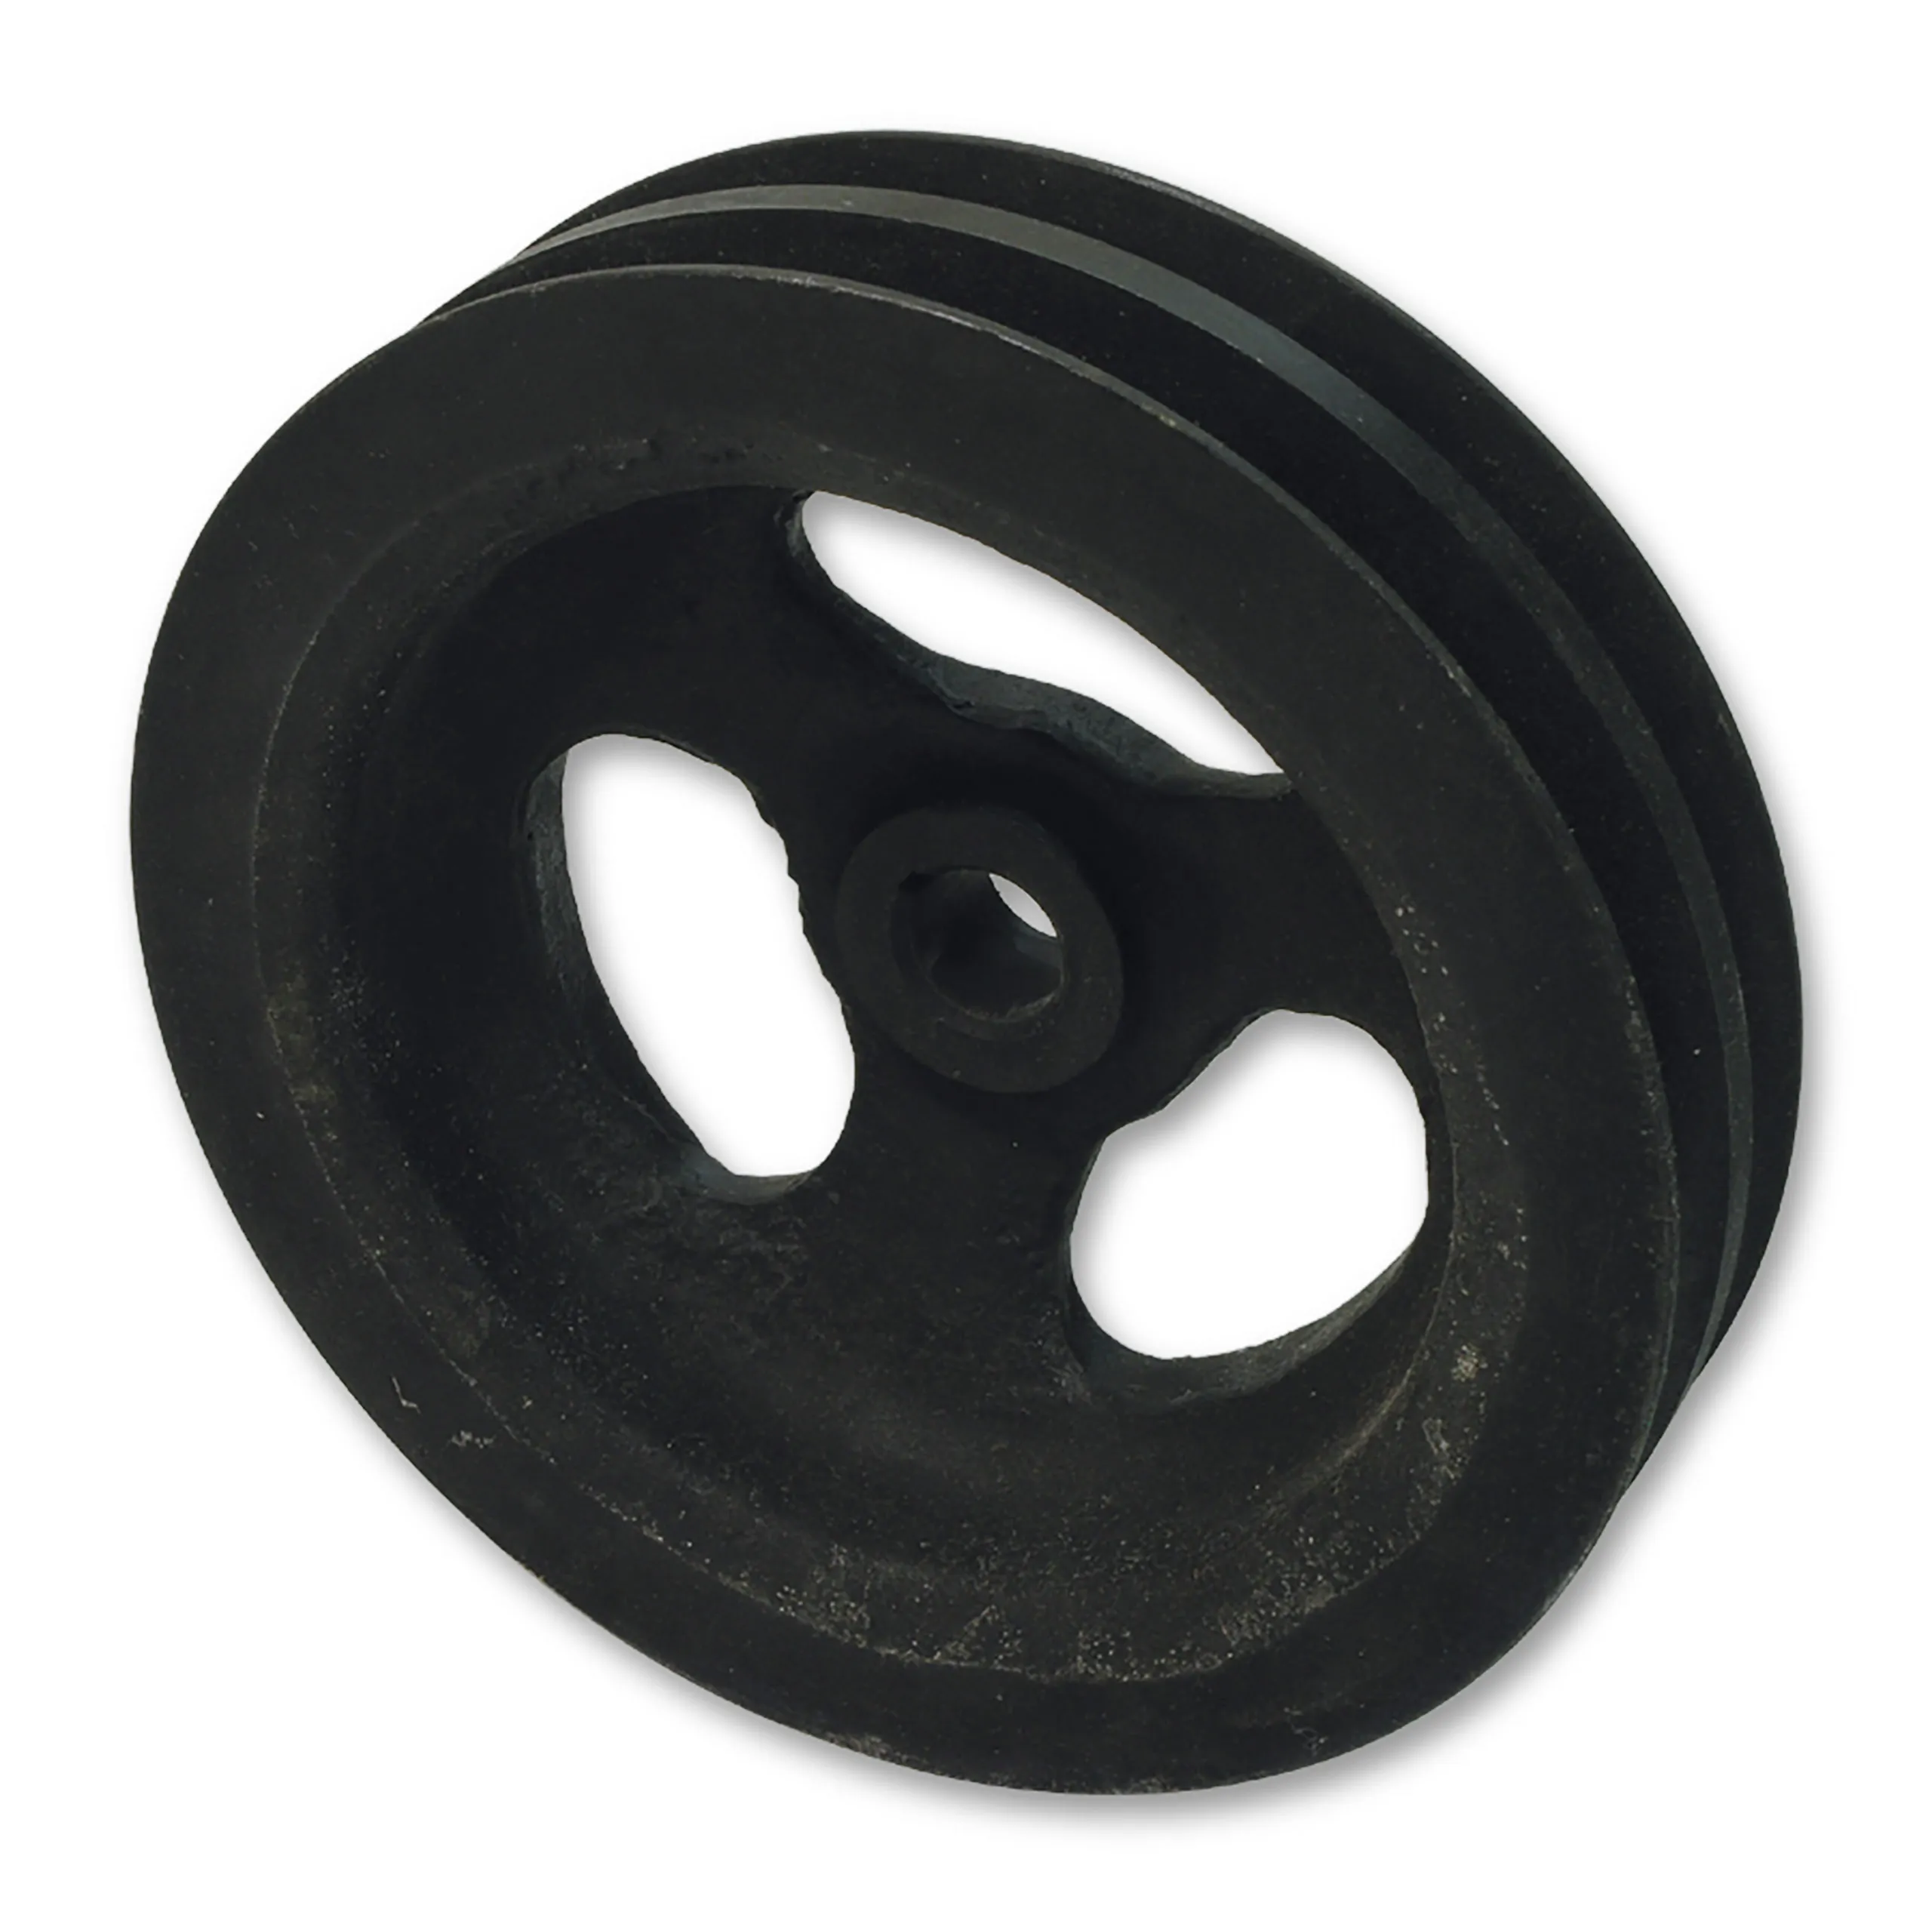 Auto Accessories of America 1965-1974 Chevrolet Corvette Power Steering Pulley. Double Groove Big Block